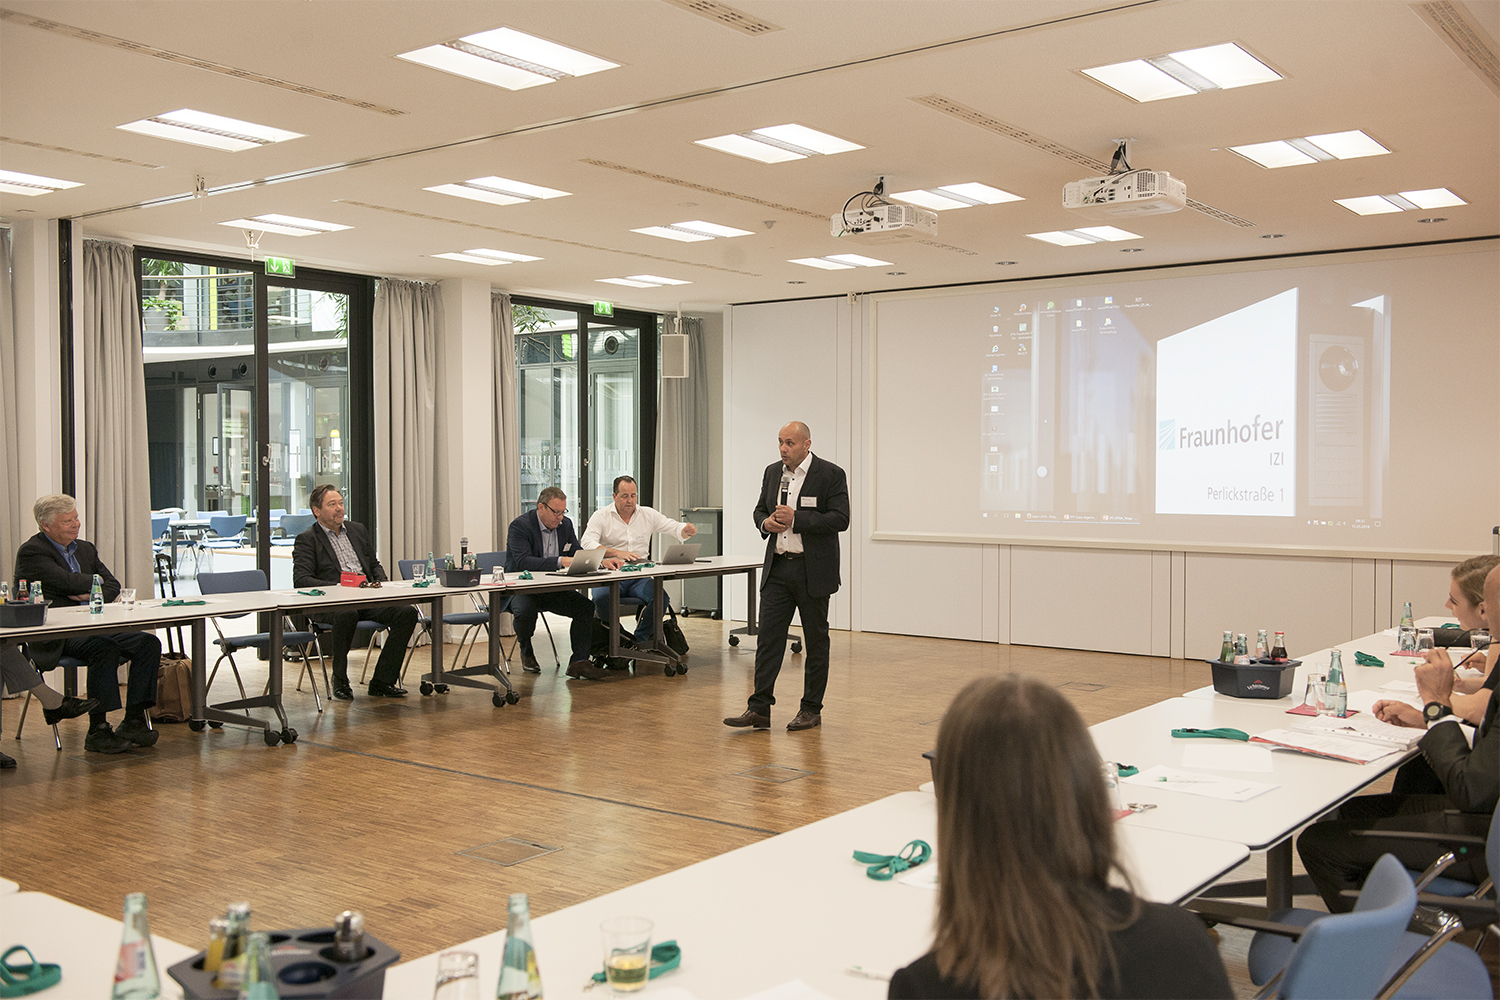 Professor Andreas Oberbach, Fraunhofer IZI, welcomes the participants from Germany, Poland, Italy and Turkey